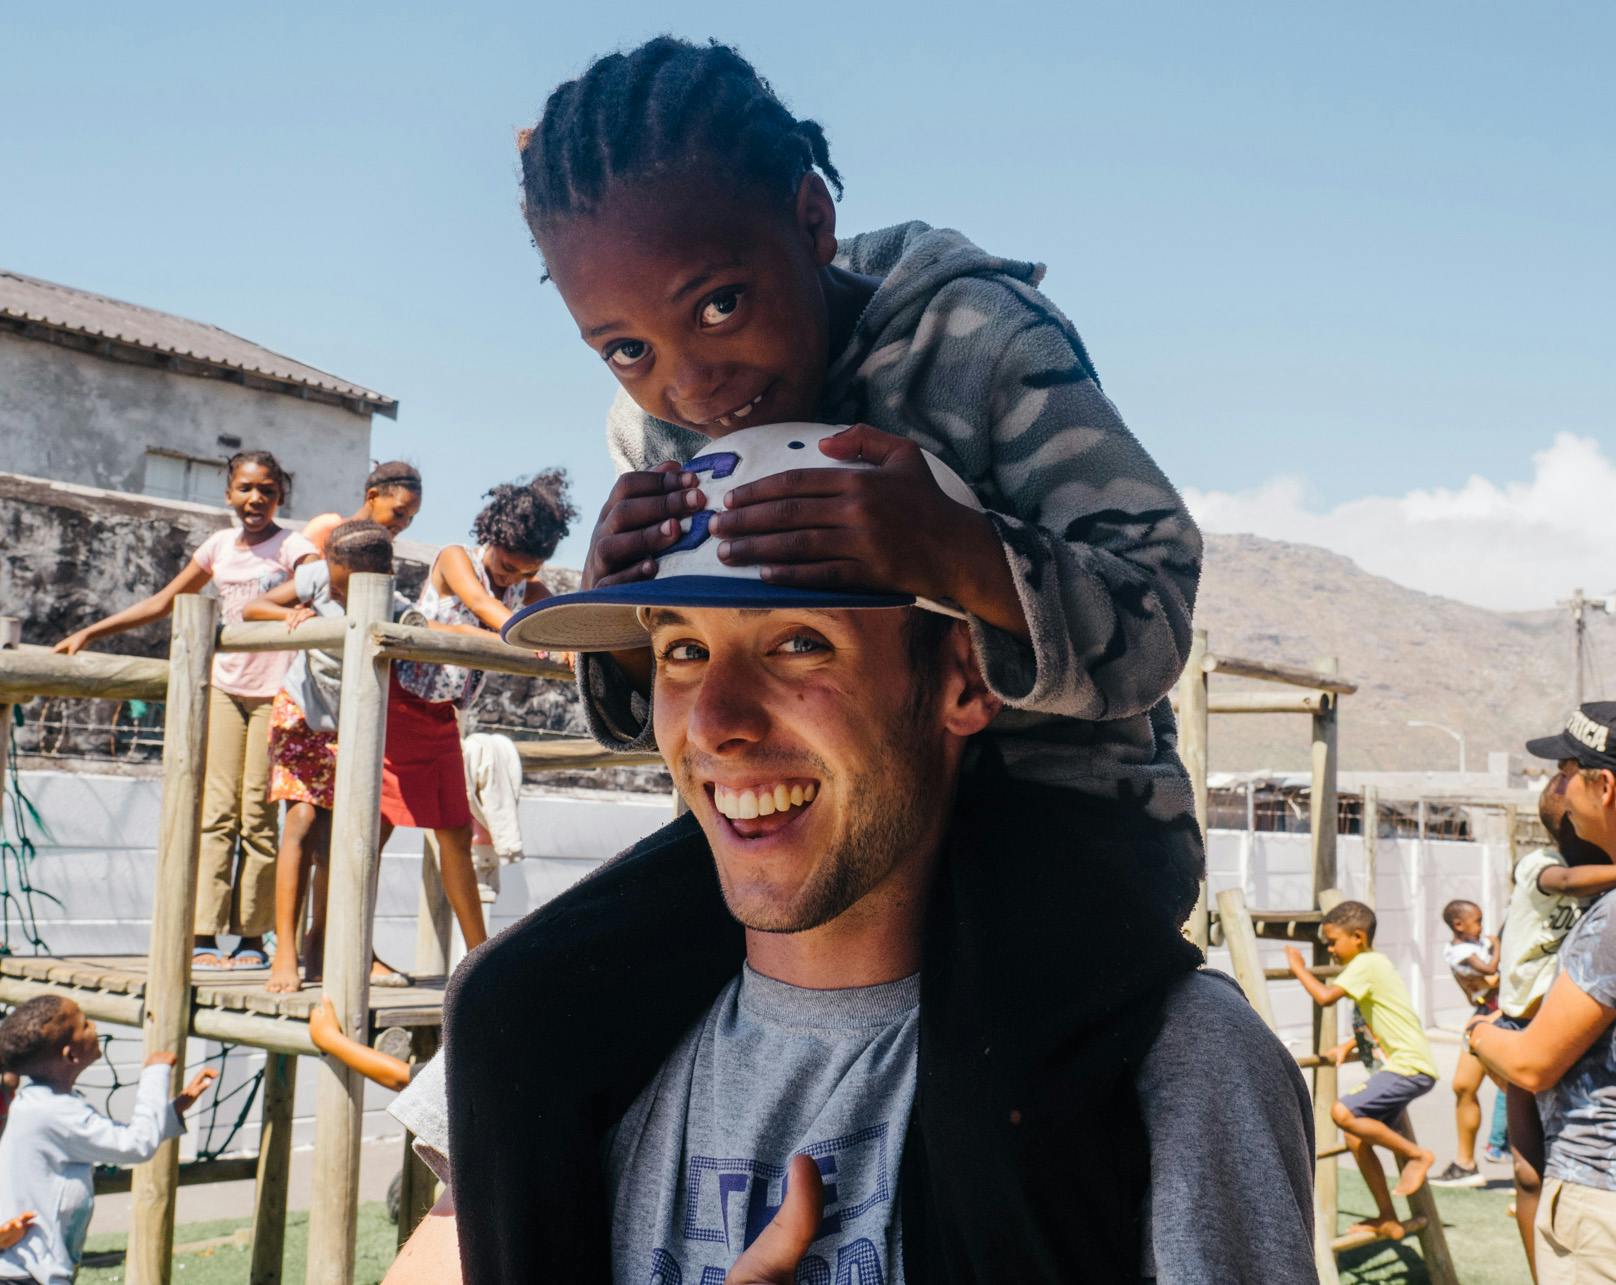 Brazil Childcare Volunteer- [Make a Difference]- Starts at $370..